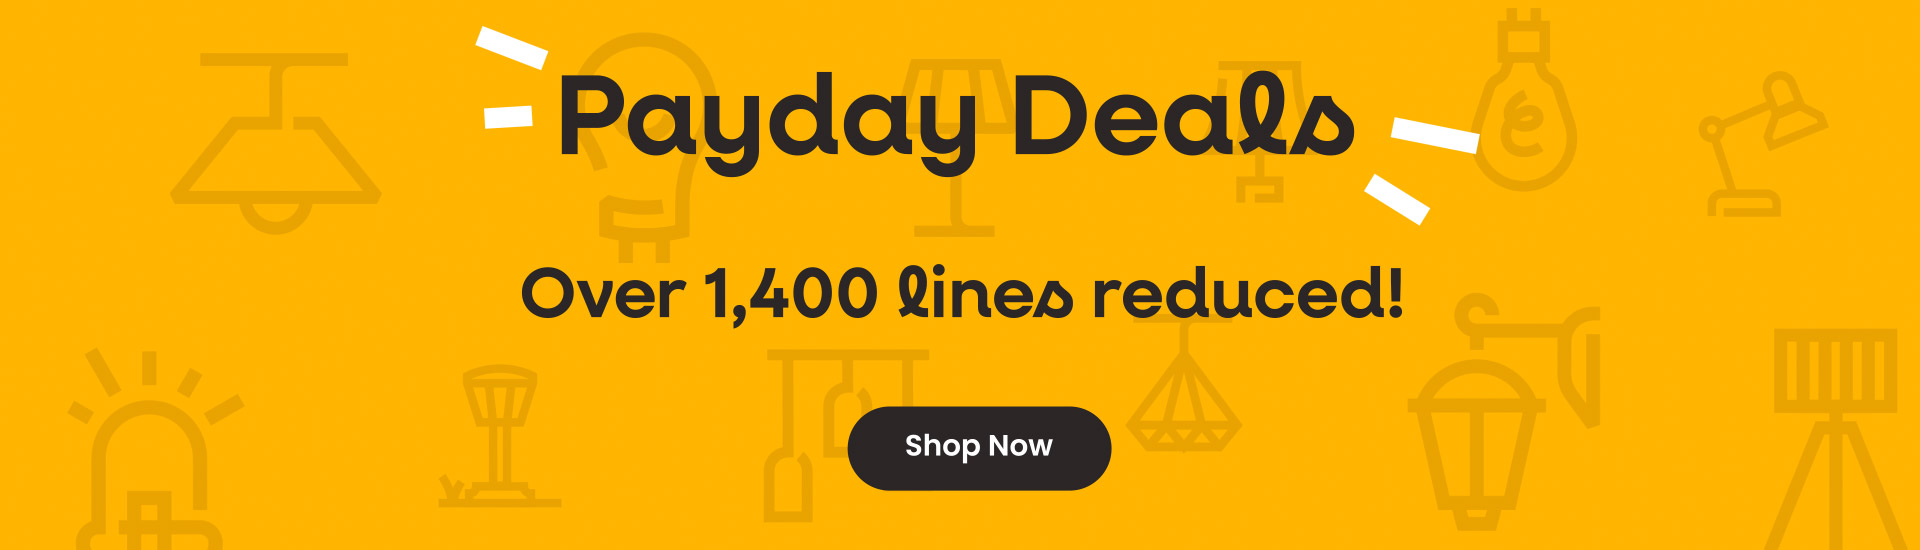 Payday Deals | Over 1,400 lines reduced